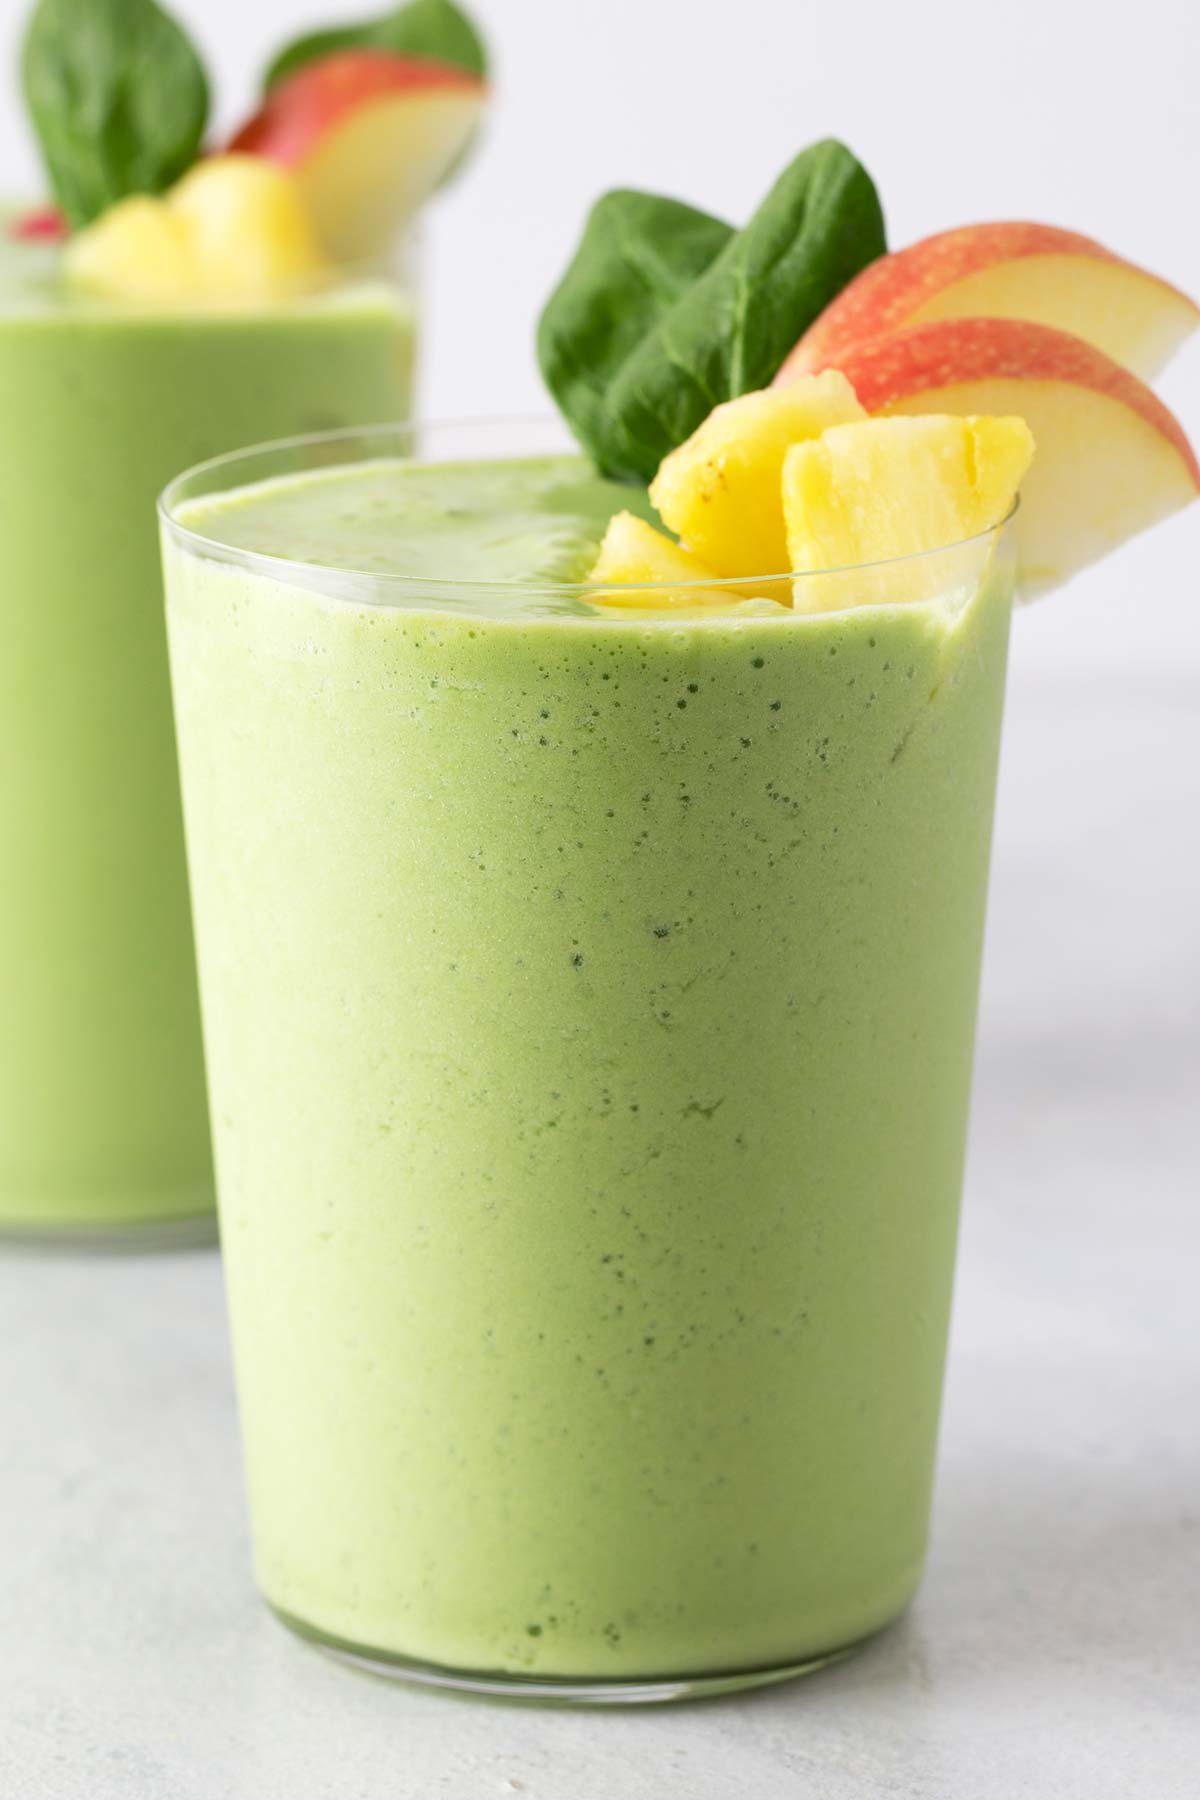 Spinach smoothie in a cup.